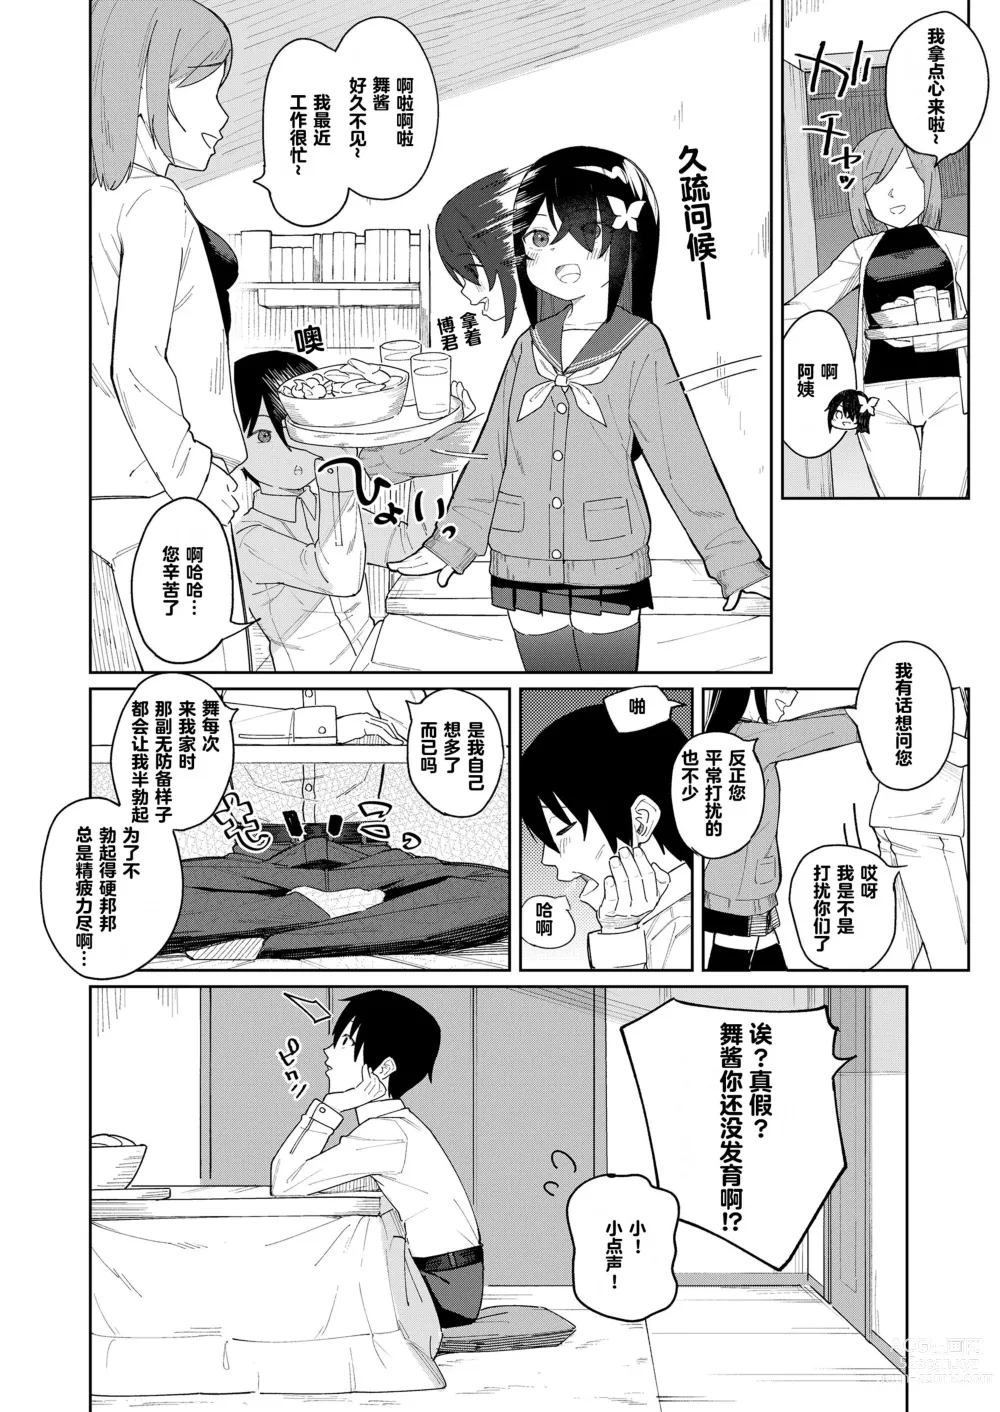 Page 3 of doujinshi My childhood friend is small